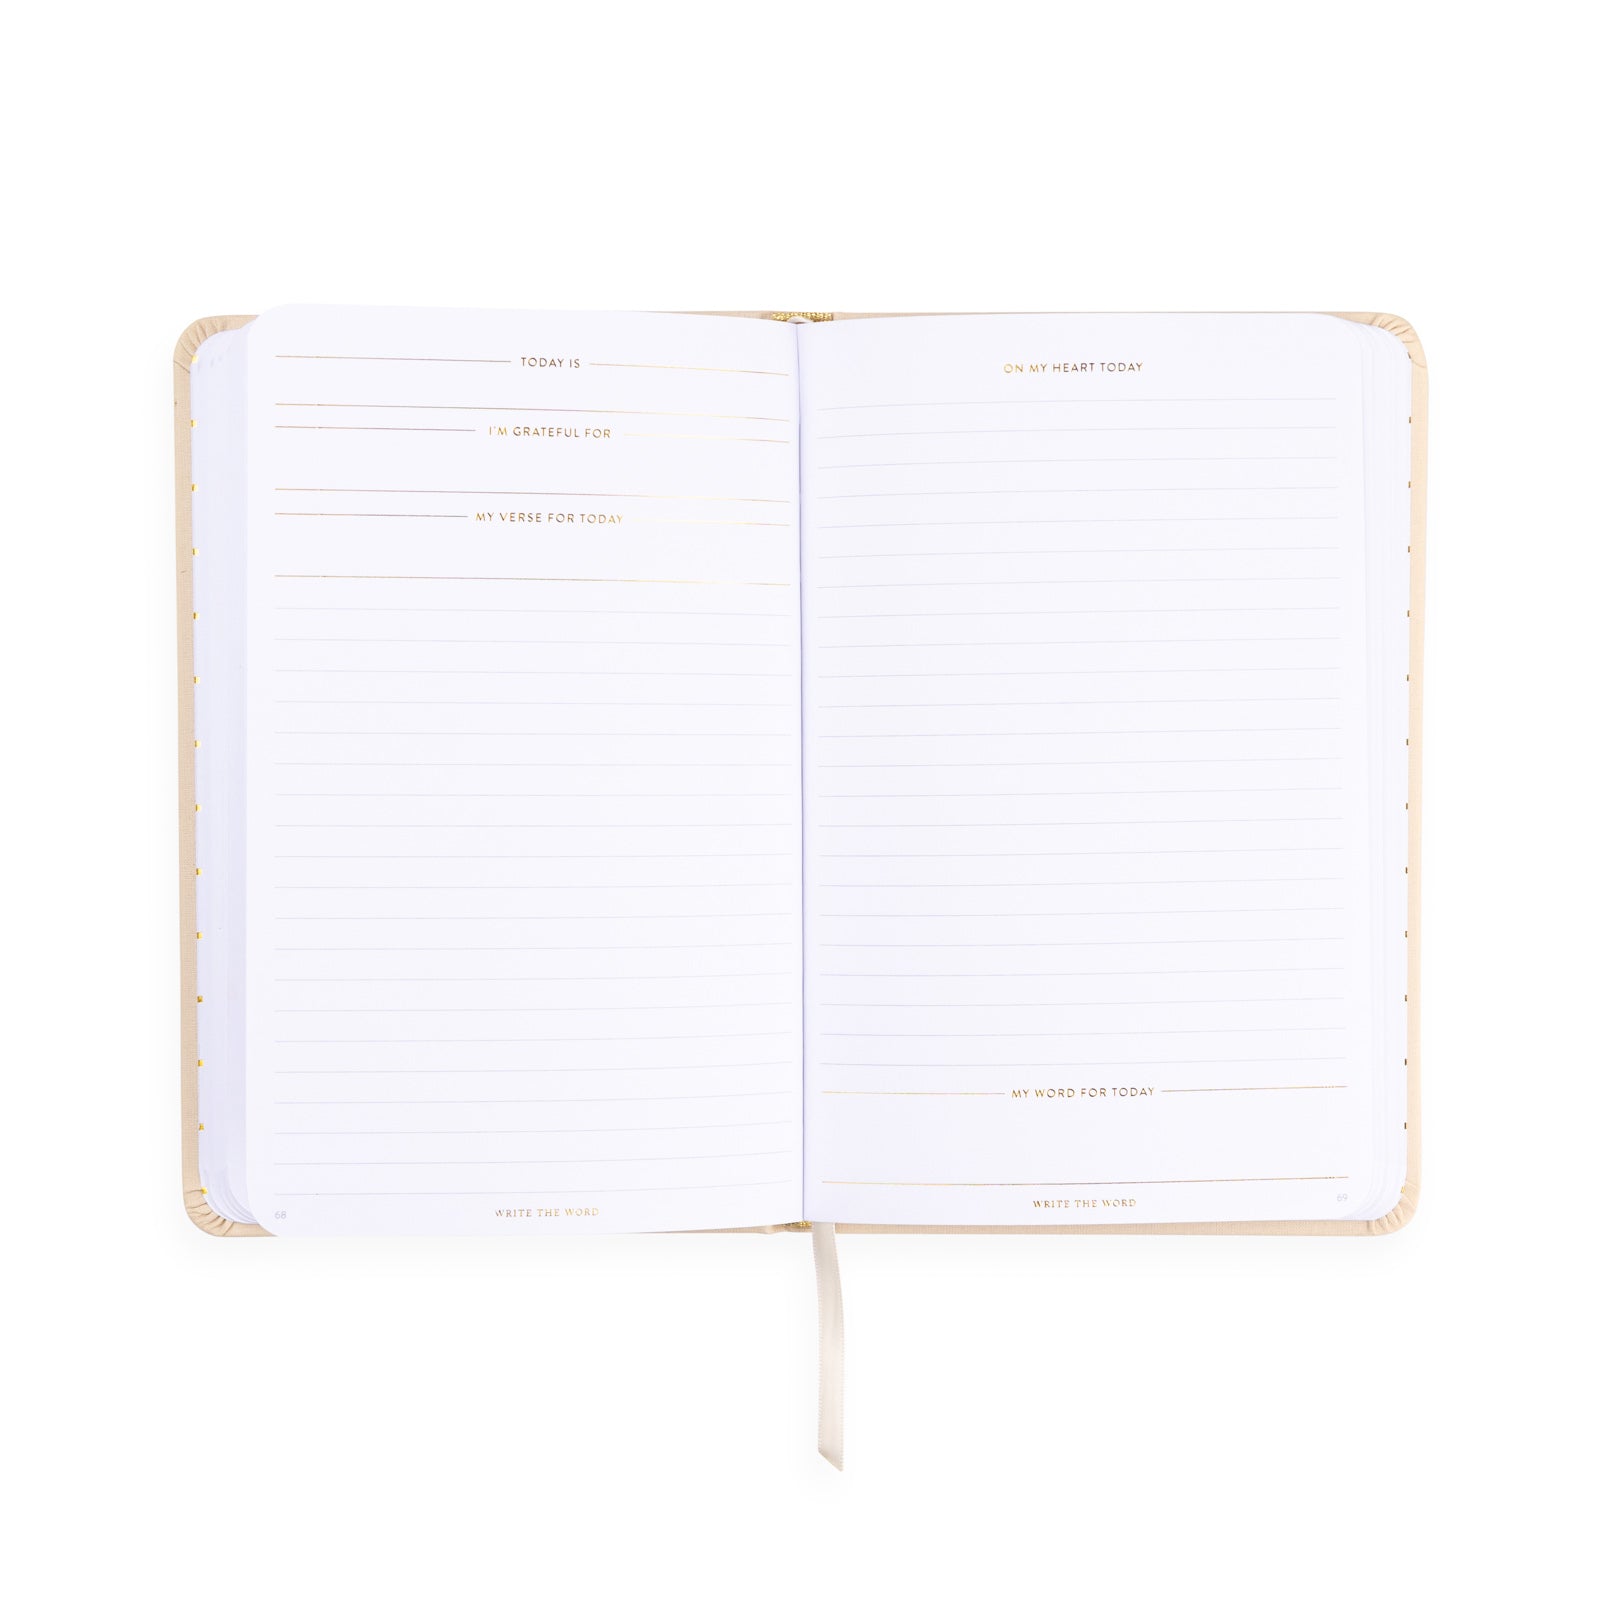 My Gratitude Journal (Blank) : An empty book to journal your own